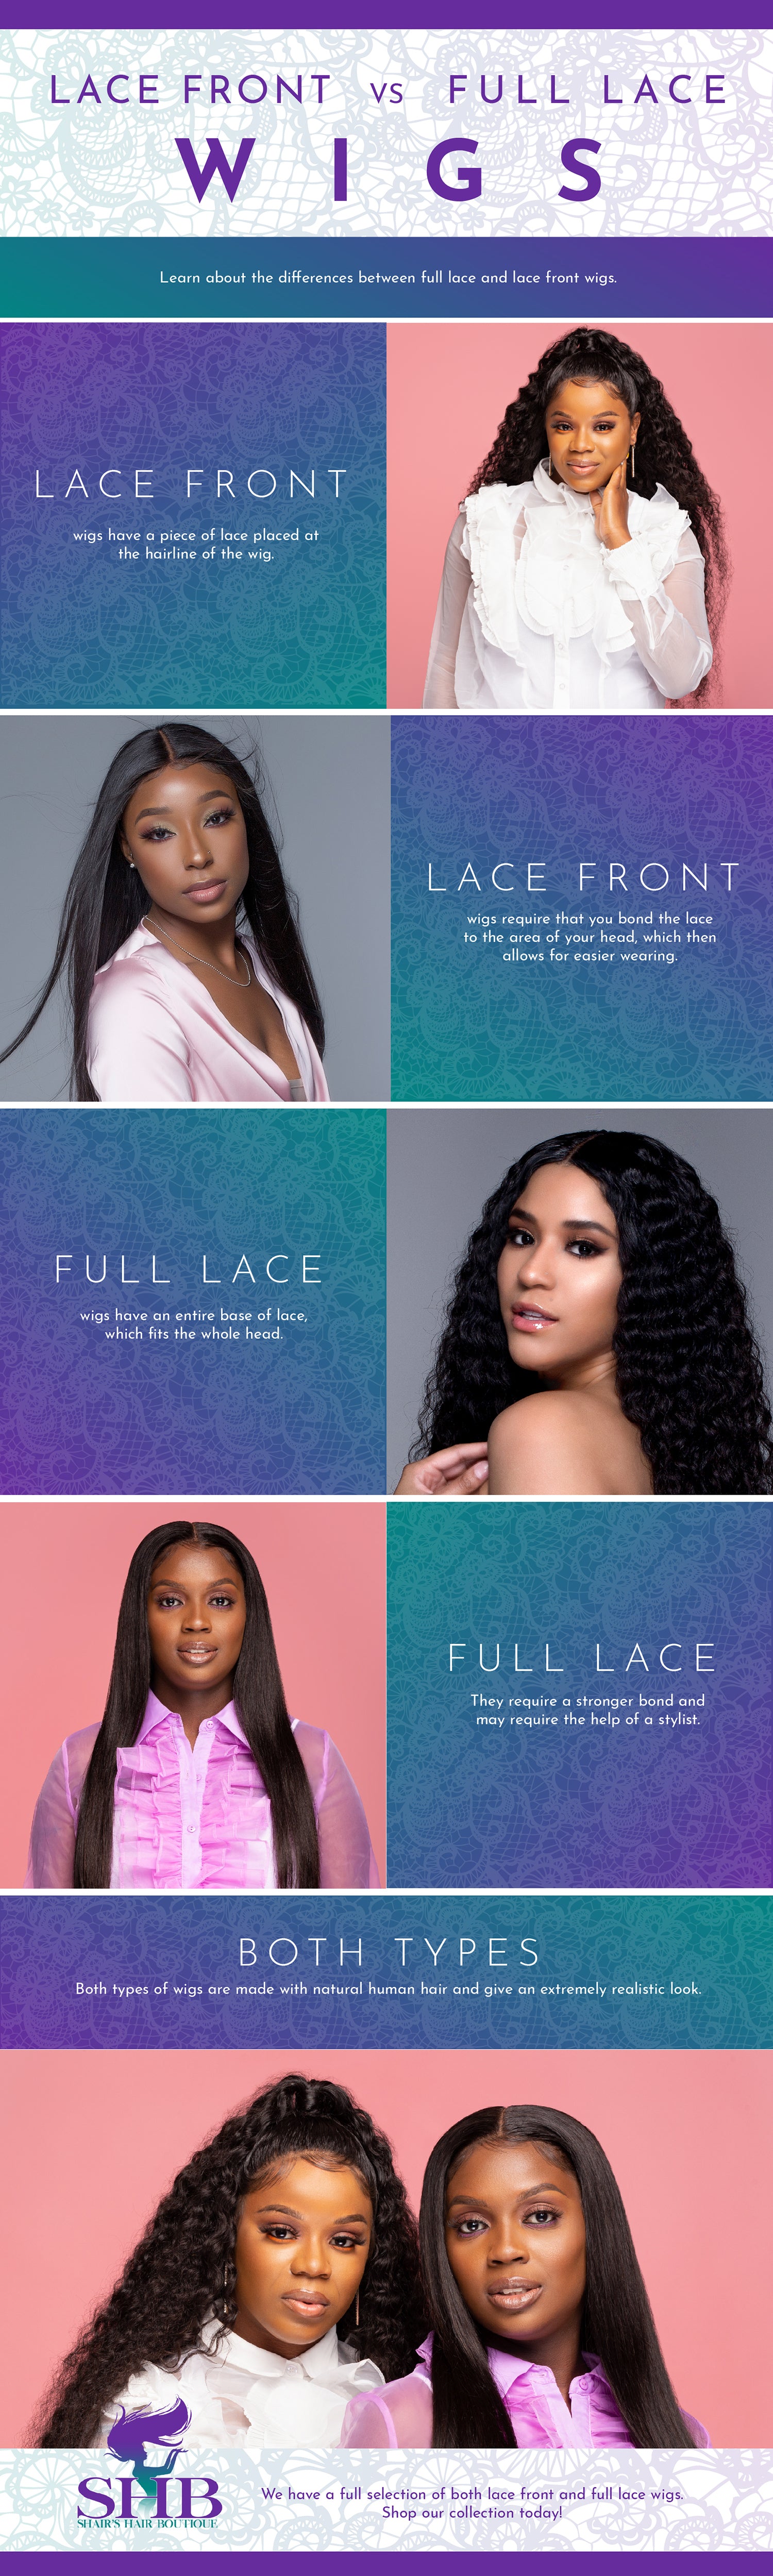 The Difference Between A Lace Front vs Full Lace Wig – Shari's Hair Boutique